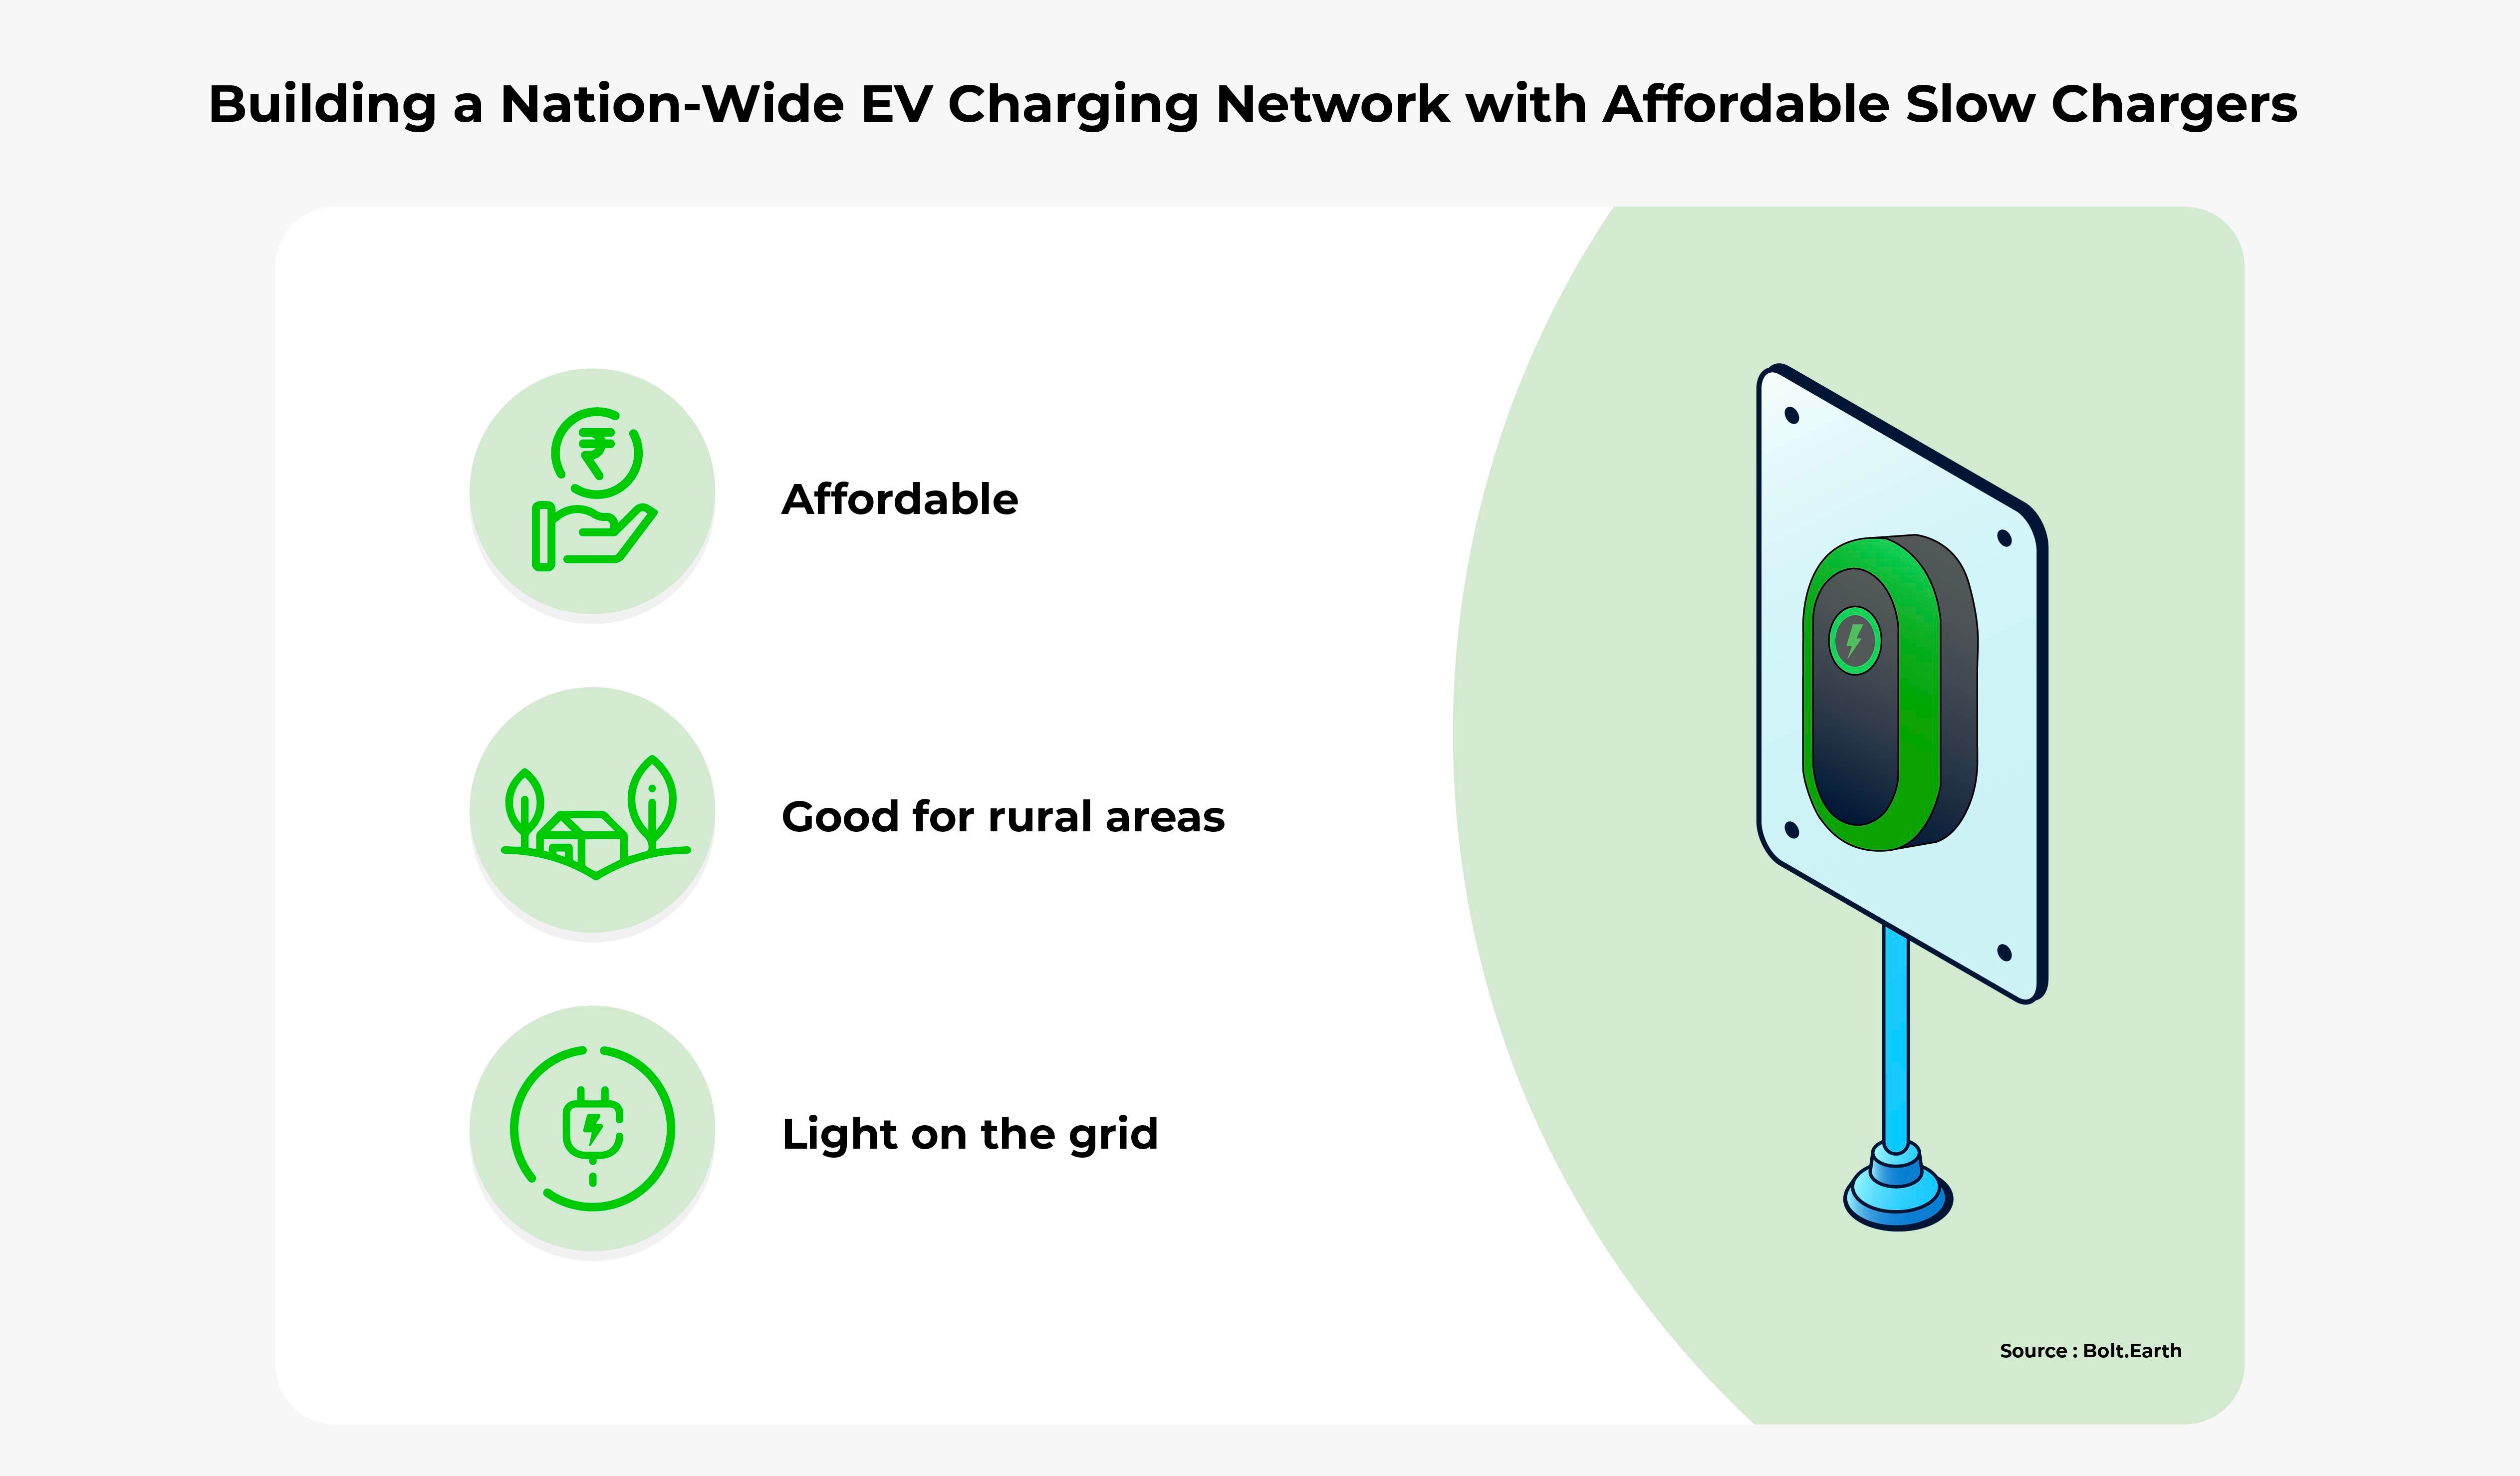 Infographic of three benefits of affordable slow chargers: they are affordable, good for rural areas, and light on the grid.